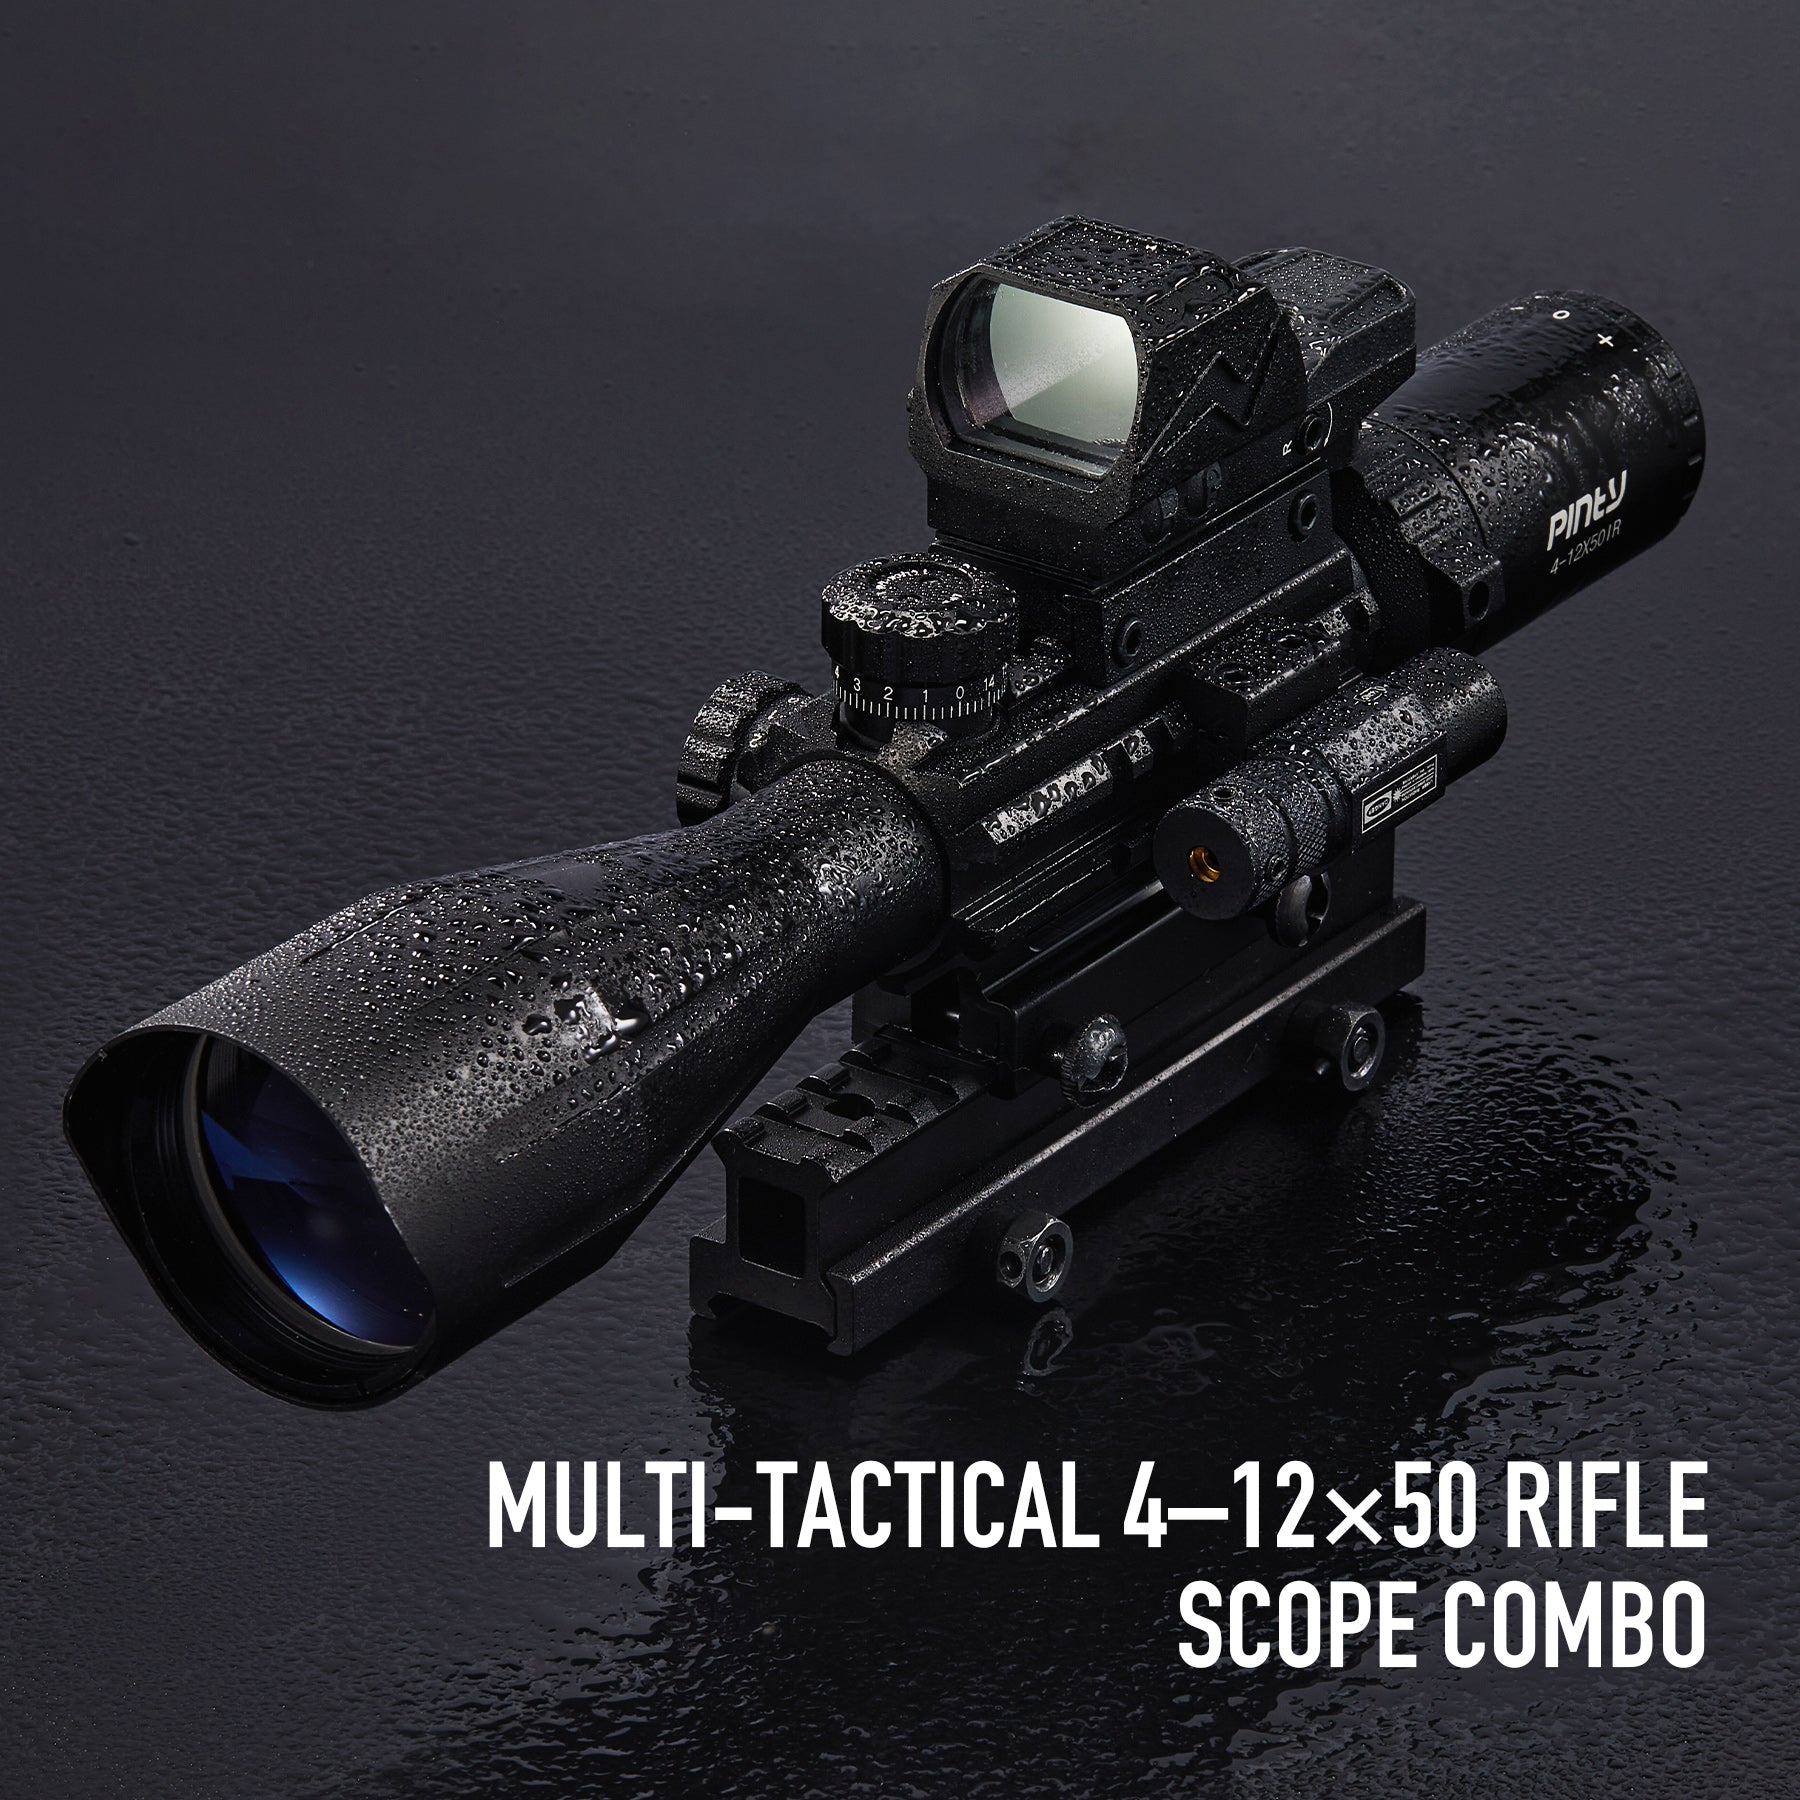 4-12x50 Rifle Scope with 4MOA Red Dot Sight & Green Laser